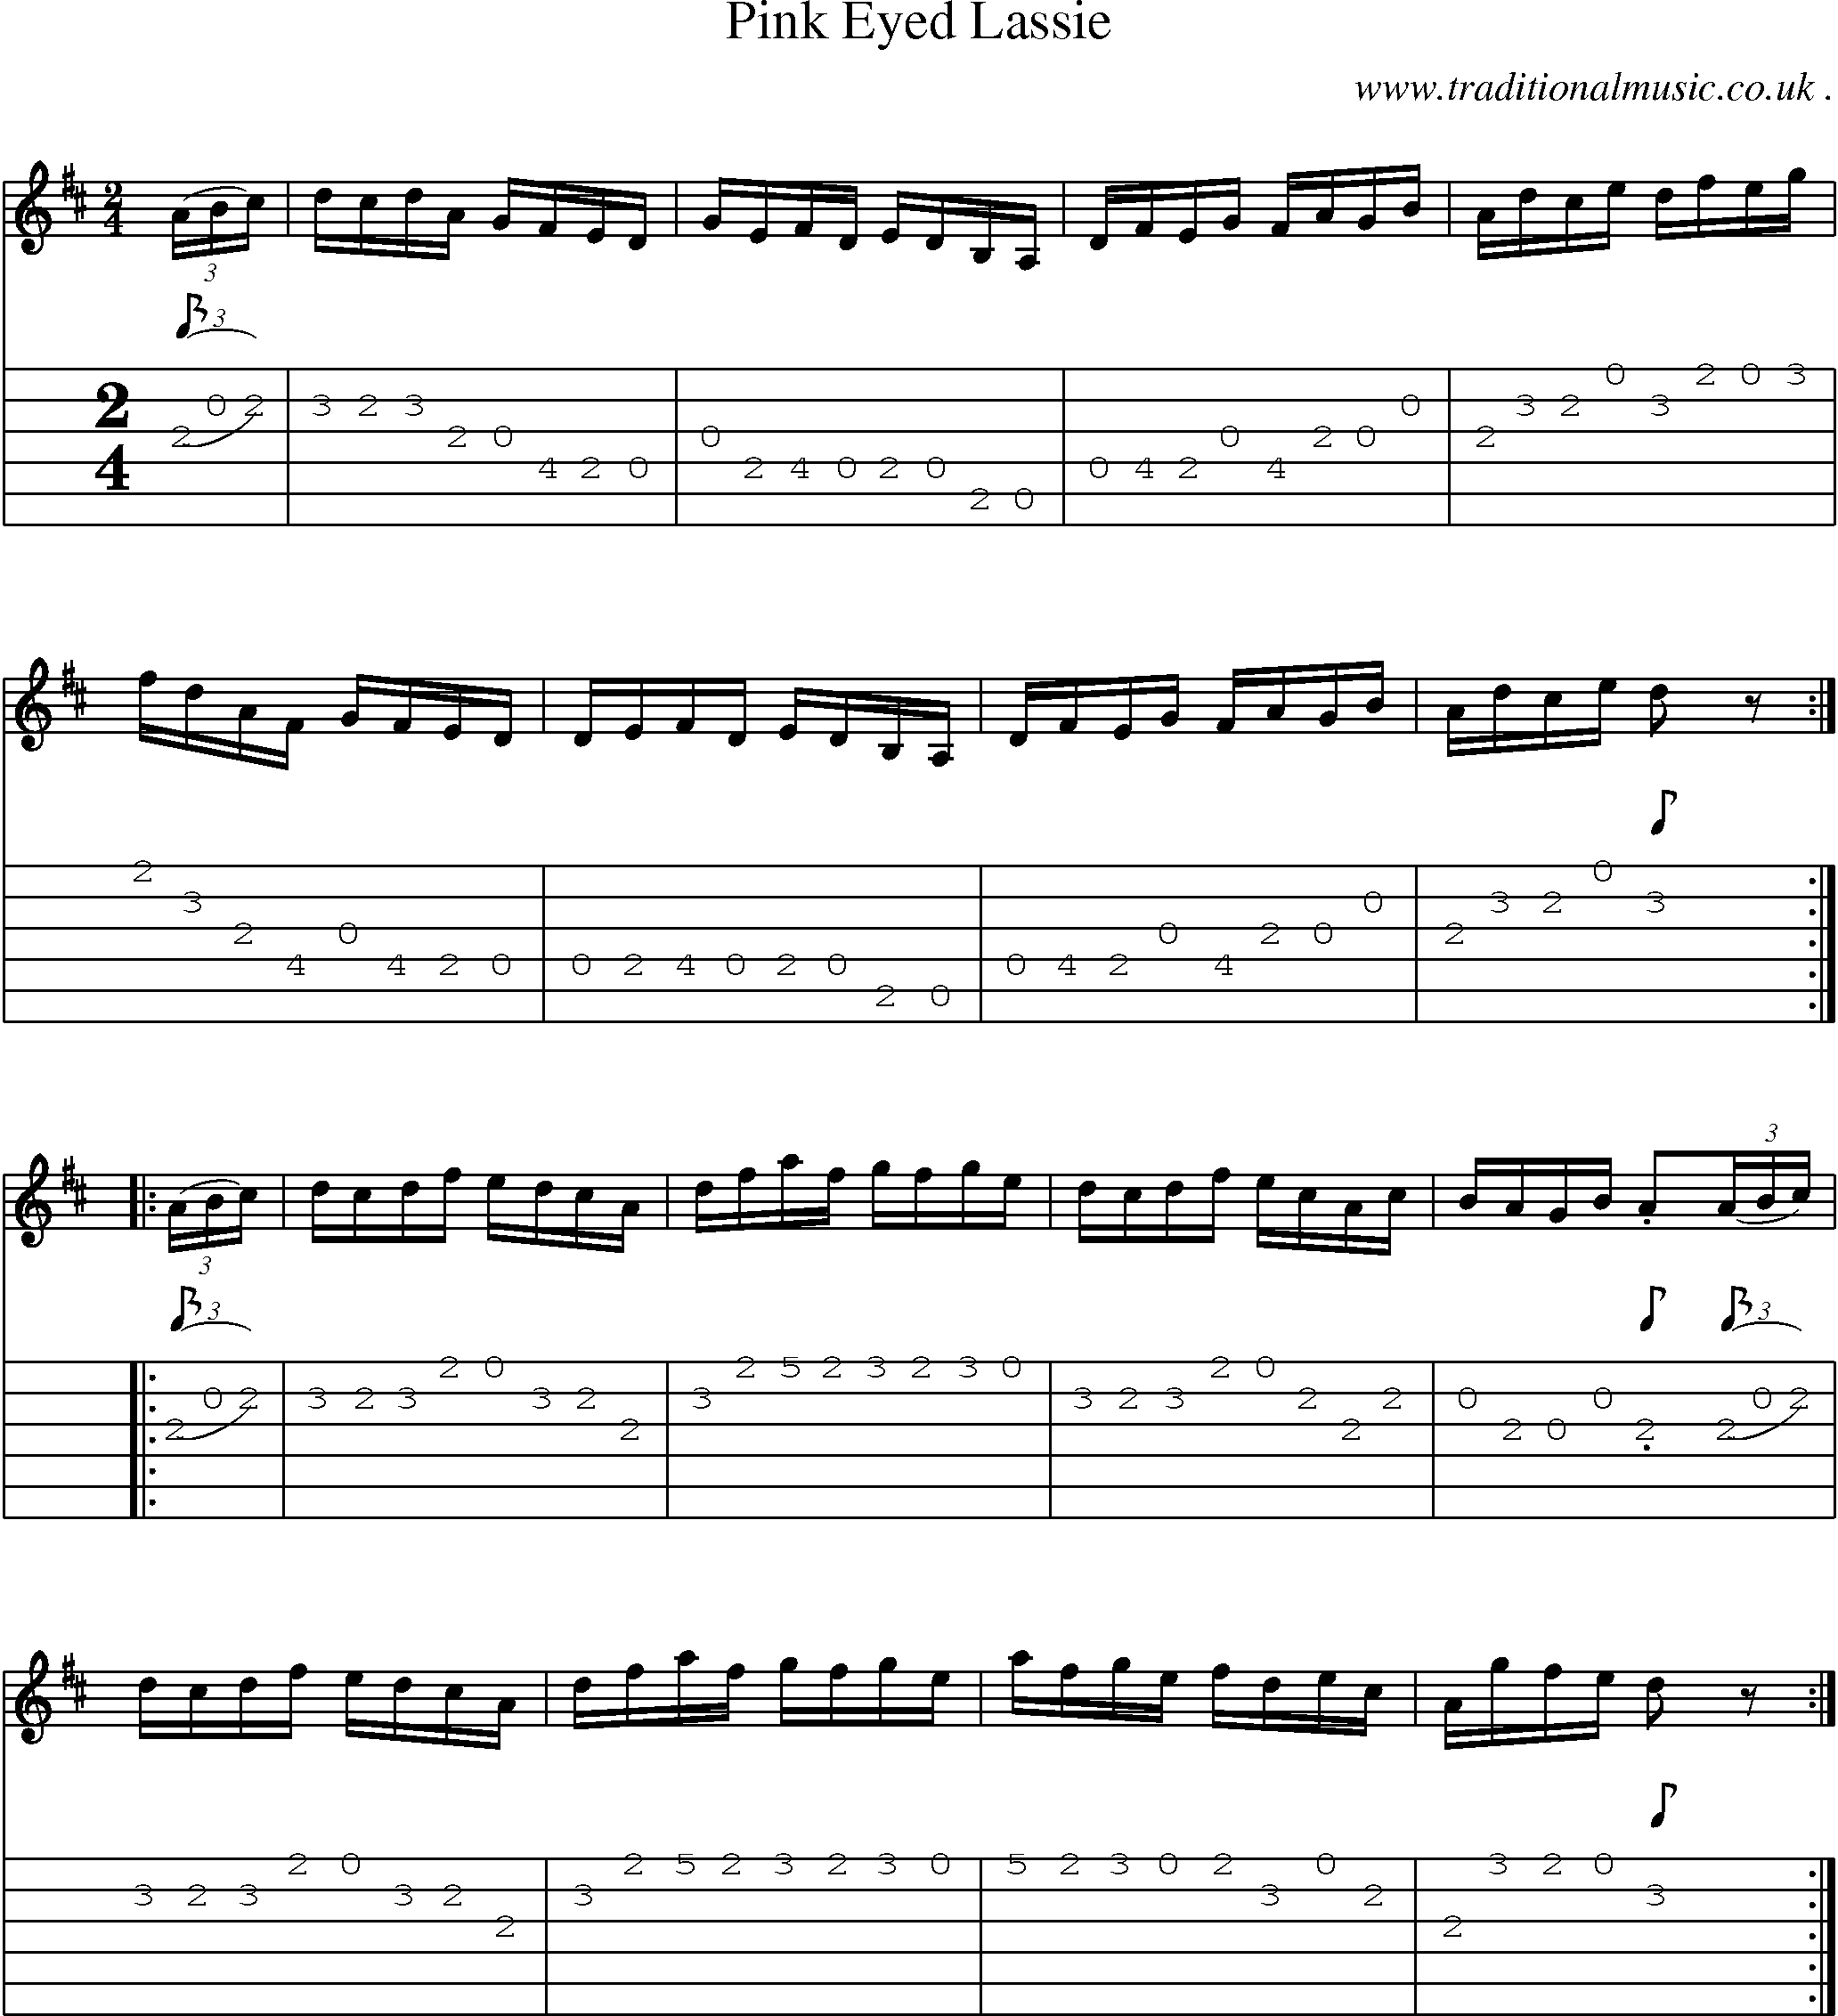 Sheet-Music and Guitar Tabs for Pink Eyed Lassie